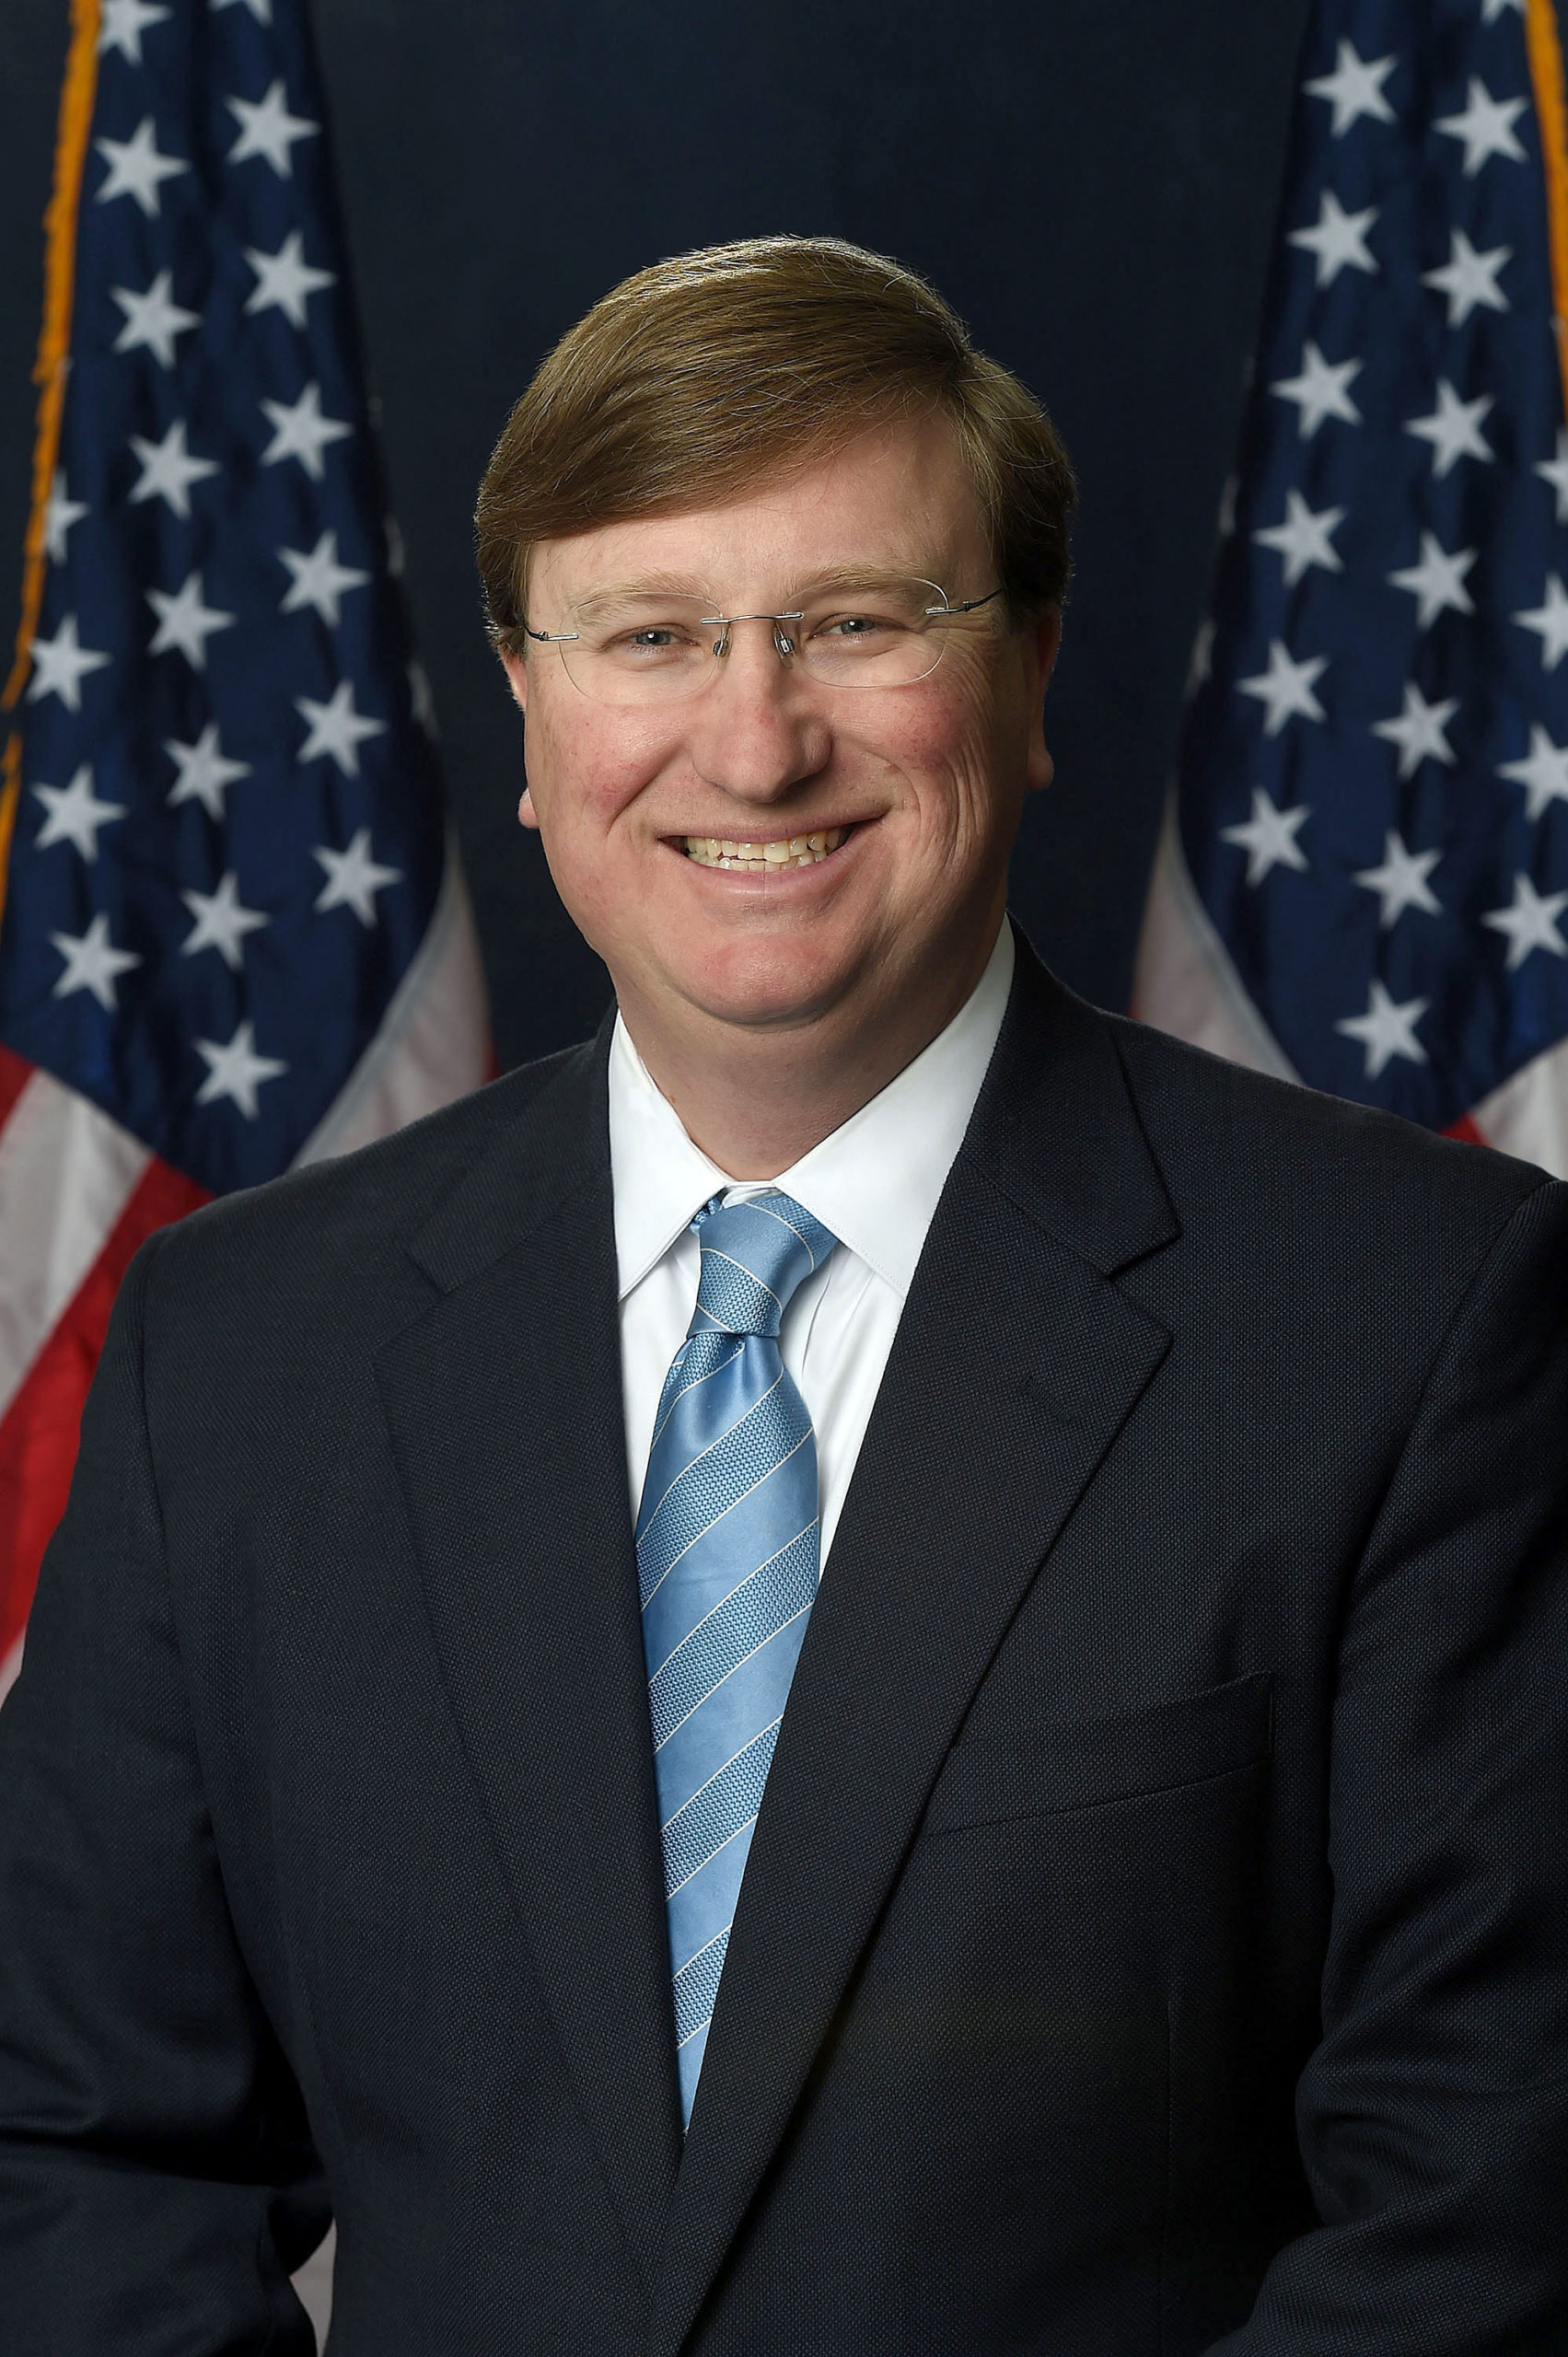 contact Tate Reeves